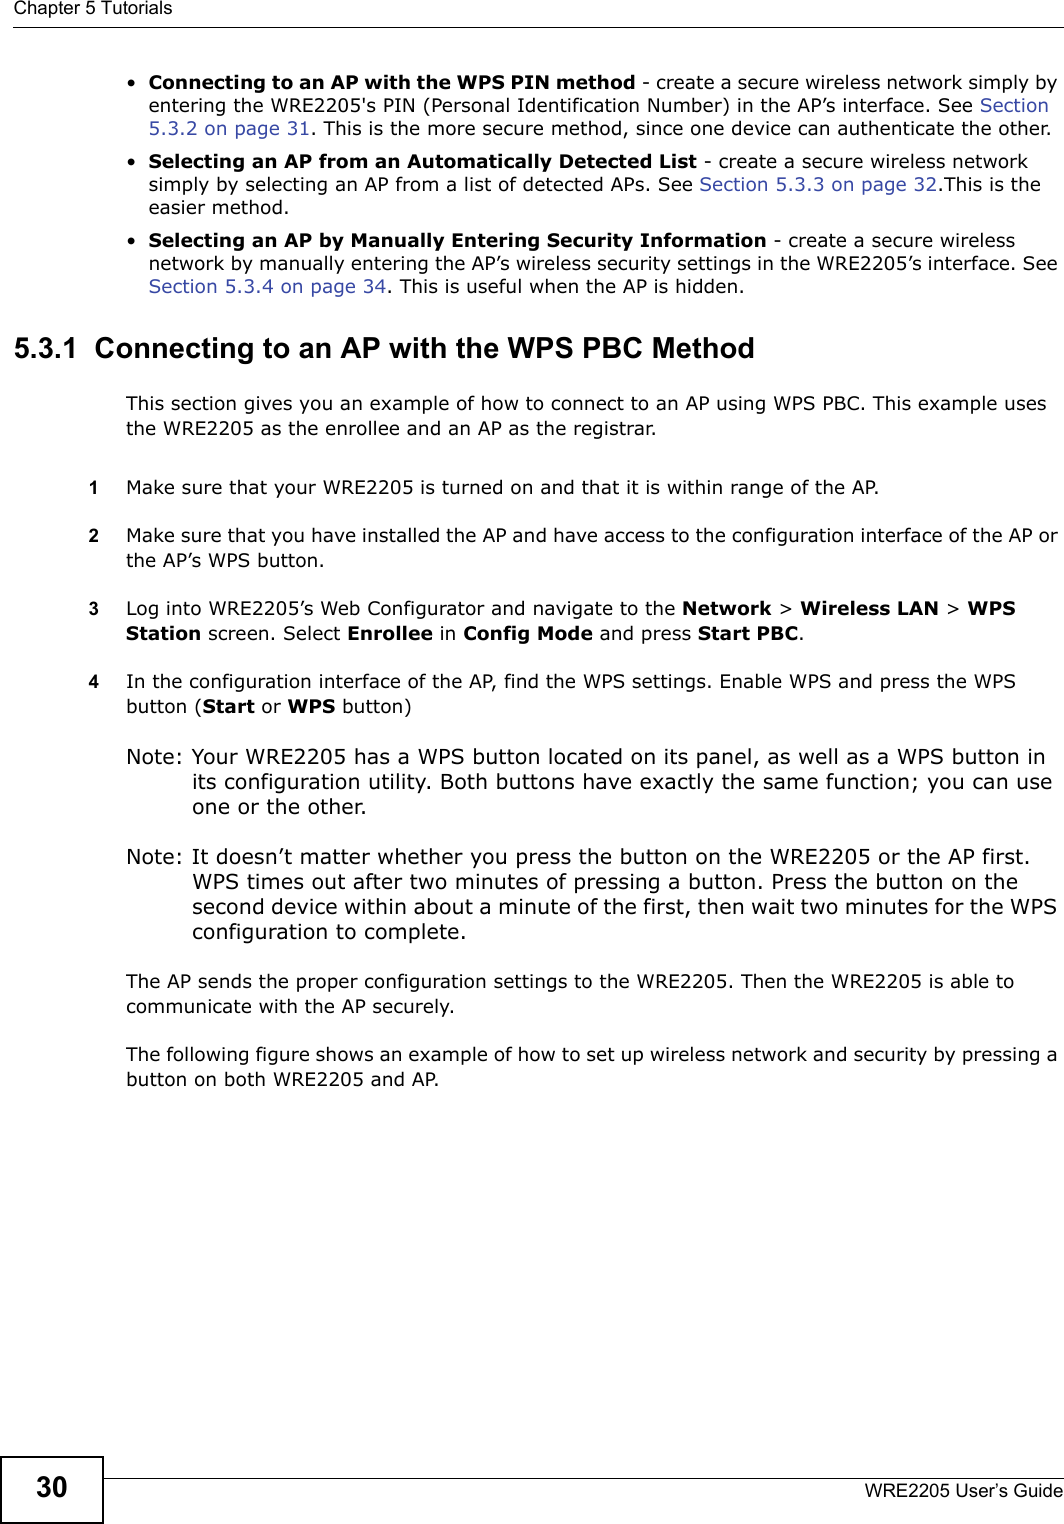 Chapter 5 TutorialsWRE2205 User’s Guide30•Connecting to an AP with the WPS PIN method - create a secure wireless network simply by entering the WRE2205&apos;s PIN (Personal Identification Number) in the AP’s interface. See Section 5.3.2 on page 31. This is the more secure method, since one device can authenticate the other.•Selecting an AP from an Automatically Detected List - create a secure wireless network simply by selecting an AP from a list of detected APs. See Section 5.3.3 on page 32.This is the easier method.•Selecting an AP by Manually Entering Security Information - create a secure wireless network by manually entering the AP’s wireless security settings in the WRE2205’s interface. See Section 5.3.4 on page 34. This is useful when the AP is hidden.5.3.1  Connecting to an AP with the WPS PBC MethodThis section gives you an example of how to connect to an AP using WPS PBC. This example uses the WRE2205 as the enrollee and an AP as the registrar.1Make sure that your WRE2205 is turned on and that it is within range of the AP. 2Make sure that you have installed the AP and have access to the configuration interface of the AP or the AP’s WPS button.3Log into WRE2205’s Web Configurator and navigate to the Network &gt; Wireless LAN &gt; WPS Station screen. Select Enrollee in Config Mode and press Start PBC.4In the configuration interface of the AP, find the WPS settings. Enable WPS and press the WPS button (Start or WPS button)Note: Your WRE2205 has a WPS button located on its panel, as well as a WPS button in its configuration utility. Both buttons have exactly the same function; you can use one or the other.Note: It doesn’t matter whether you press the button on the WRE2205 or the AP first. WPS times out after two minutes of pressing a button. Press the button on the second device within about a minute of the first, then wait two minutes for the WPS configuration to complete.  The AP sends the proper configuration settings to the WRE2205. Then the WRE2205 is able to communicate with the AP securely. The following figure shows an example of how to set up wireless network and security by pressing a button on both WRE2205 and AP.